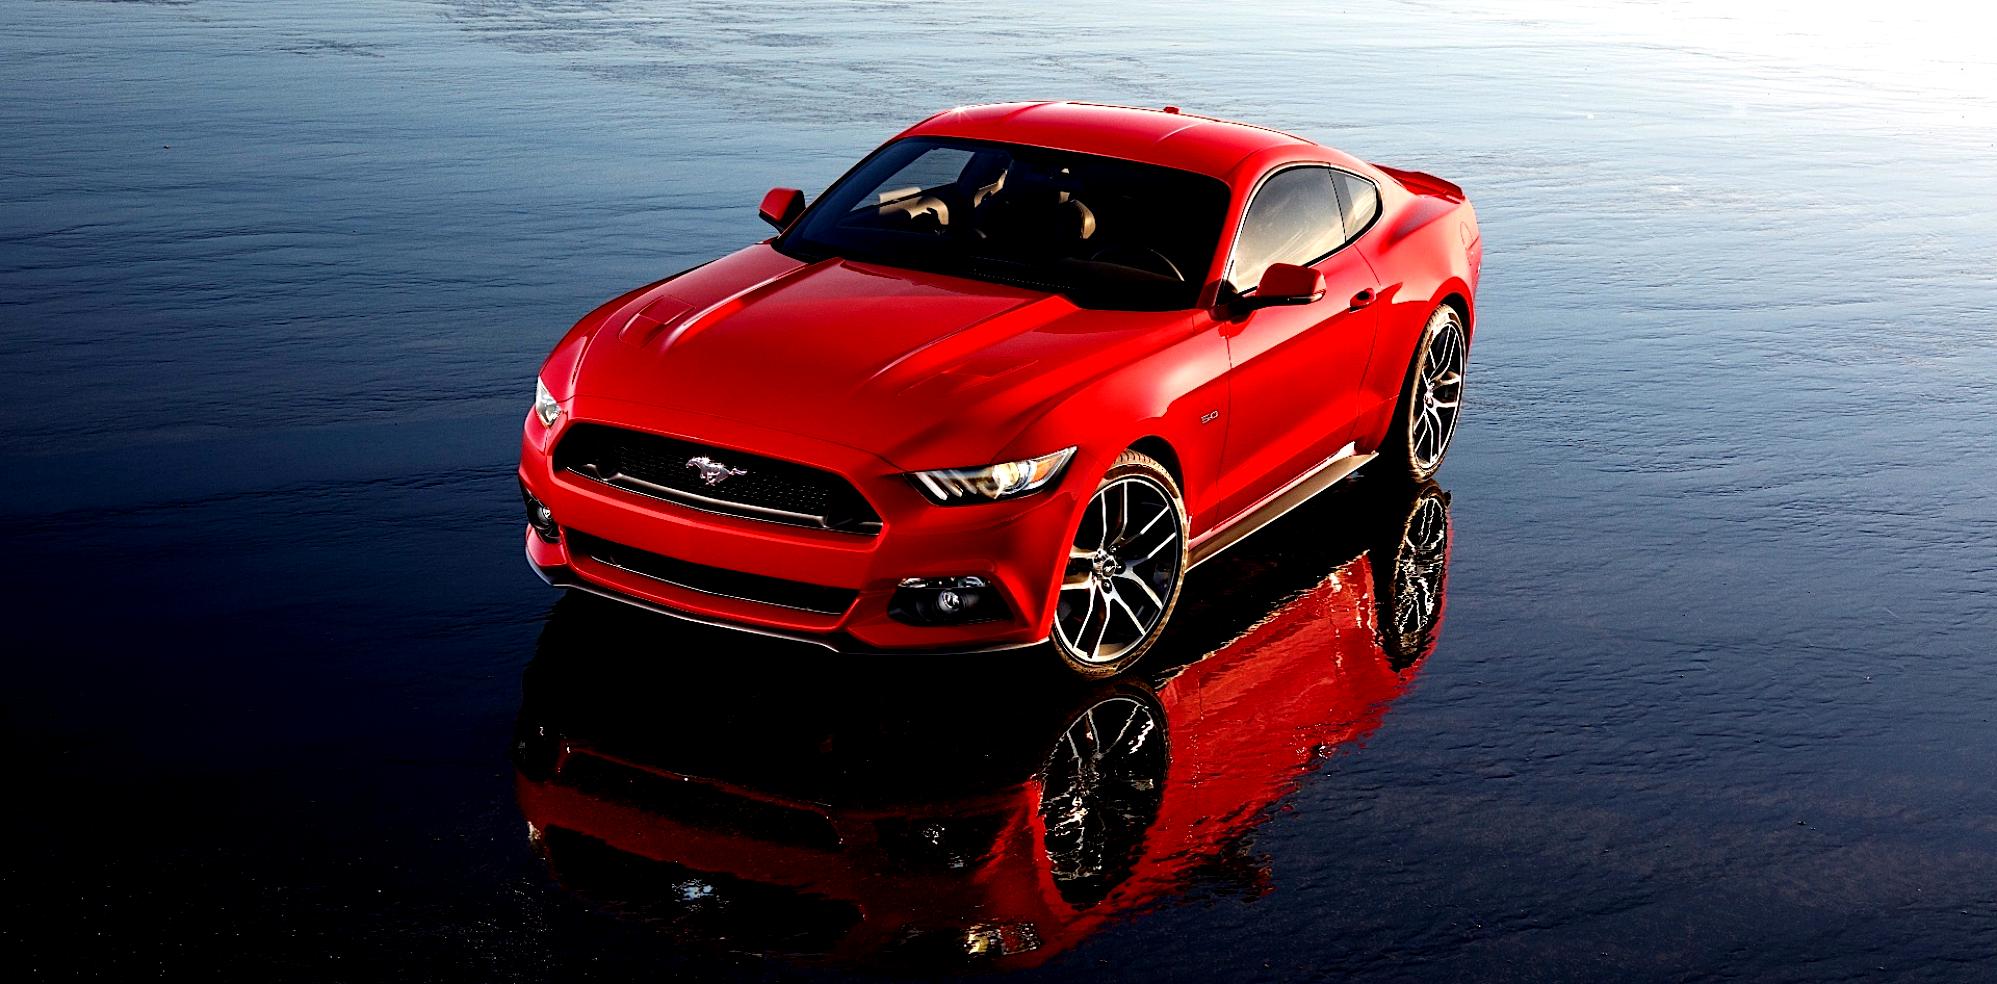 Ford Mustang 2014 #2